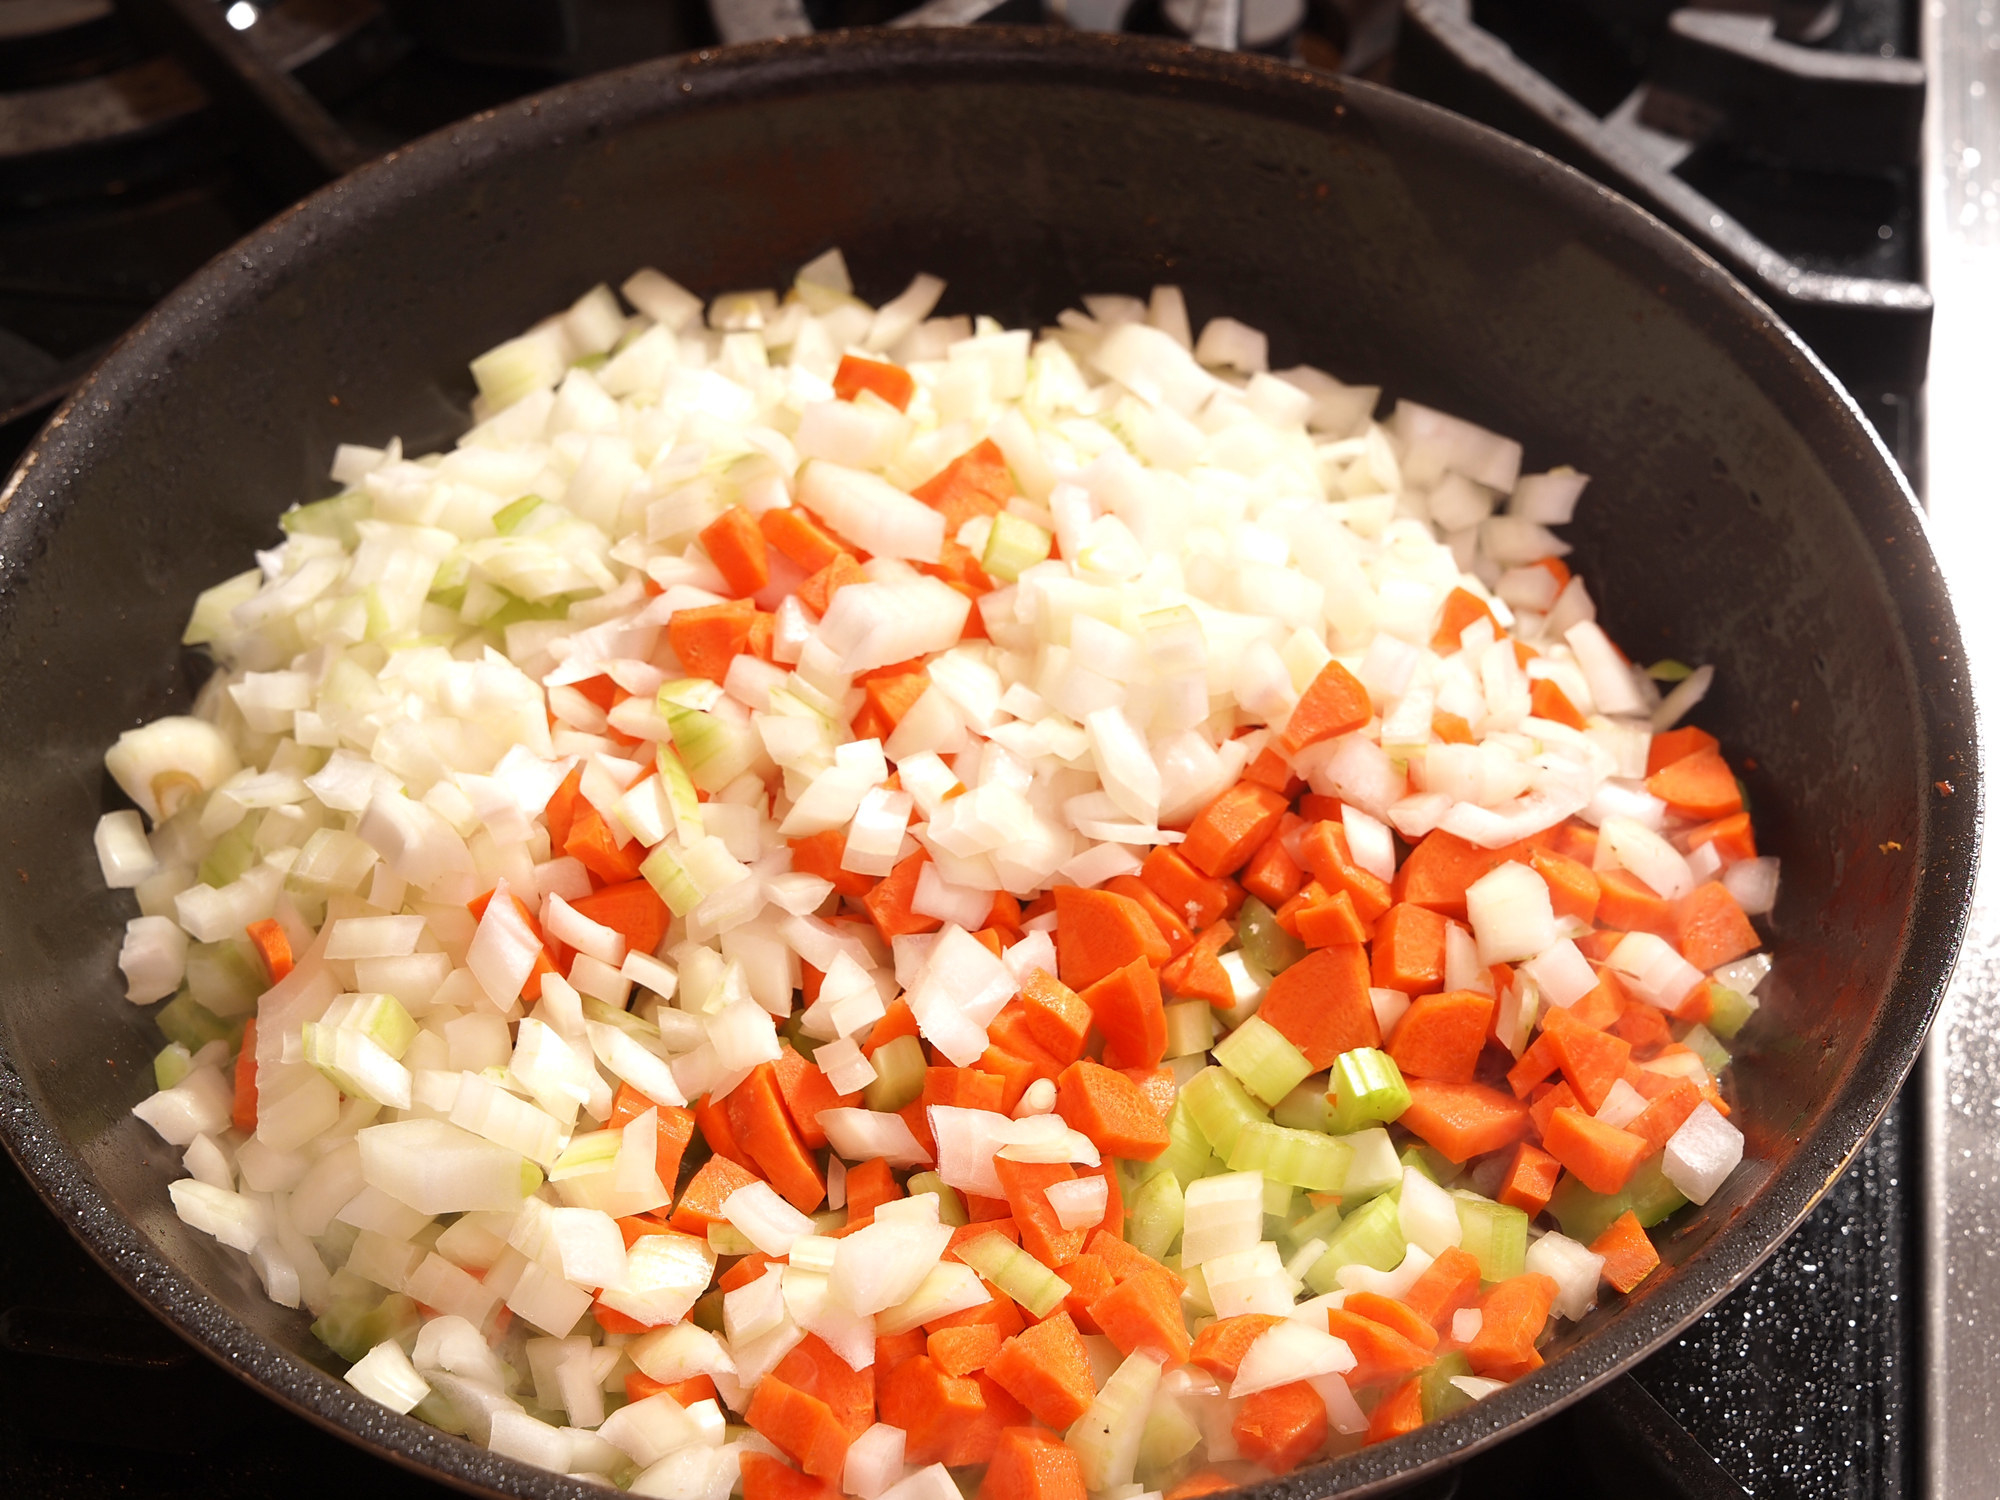 Diced carrot, celery and onion (mirepoix) in skillet on range